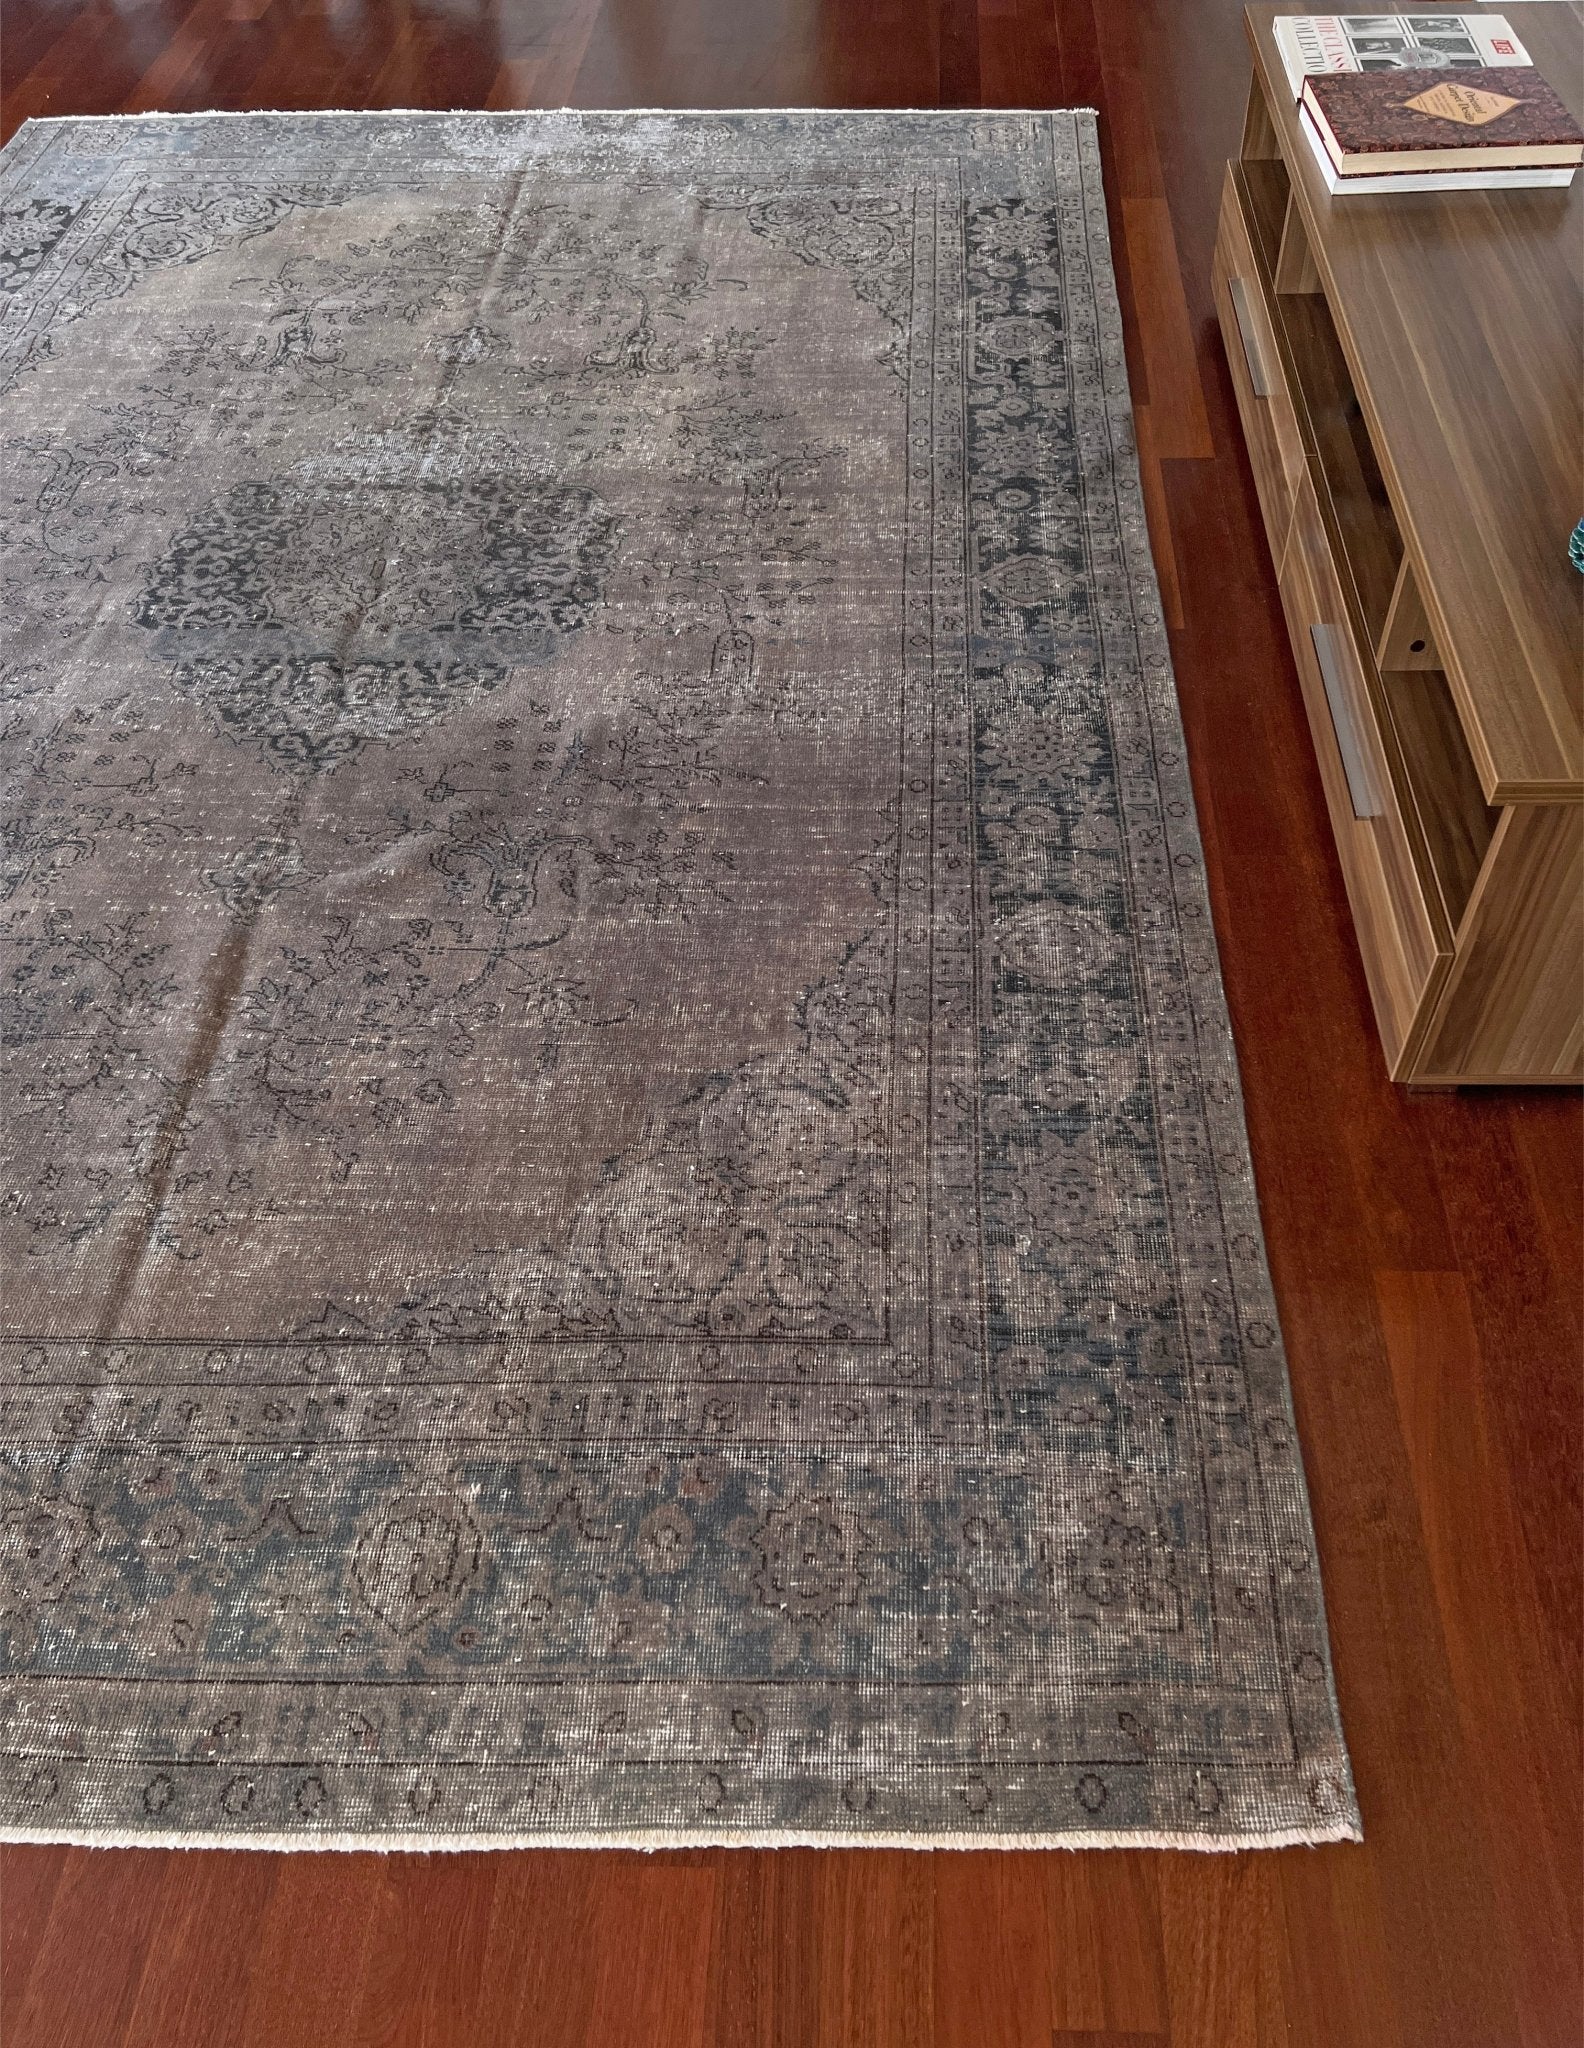 Affordable handmade modern rug san francisco bay area. Buy oriental rug online rug shopping free shipping to USA and Canada.